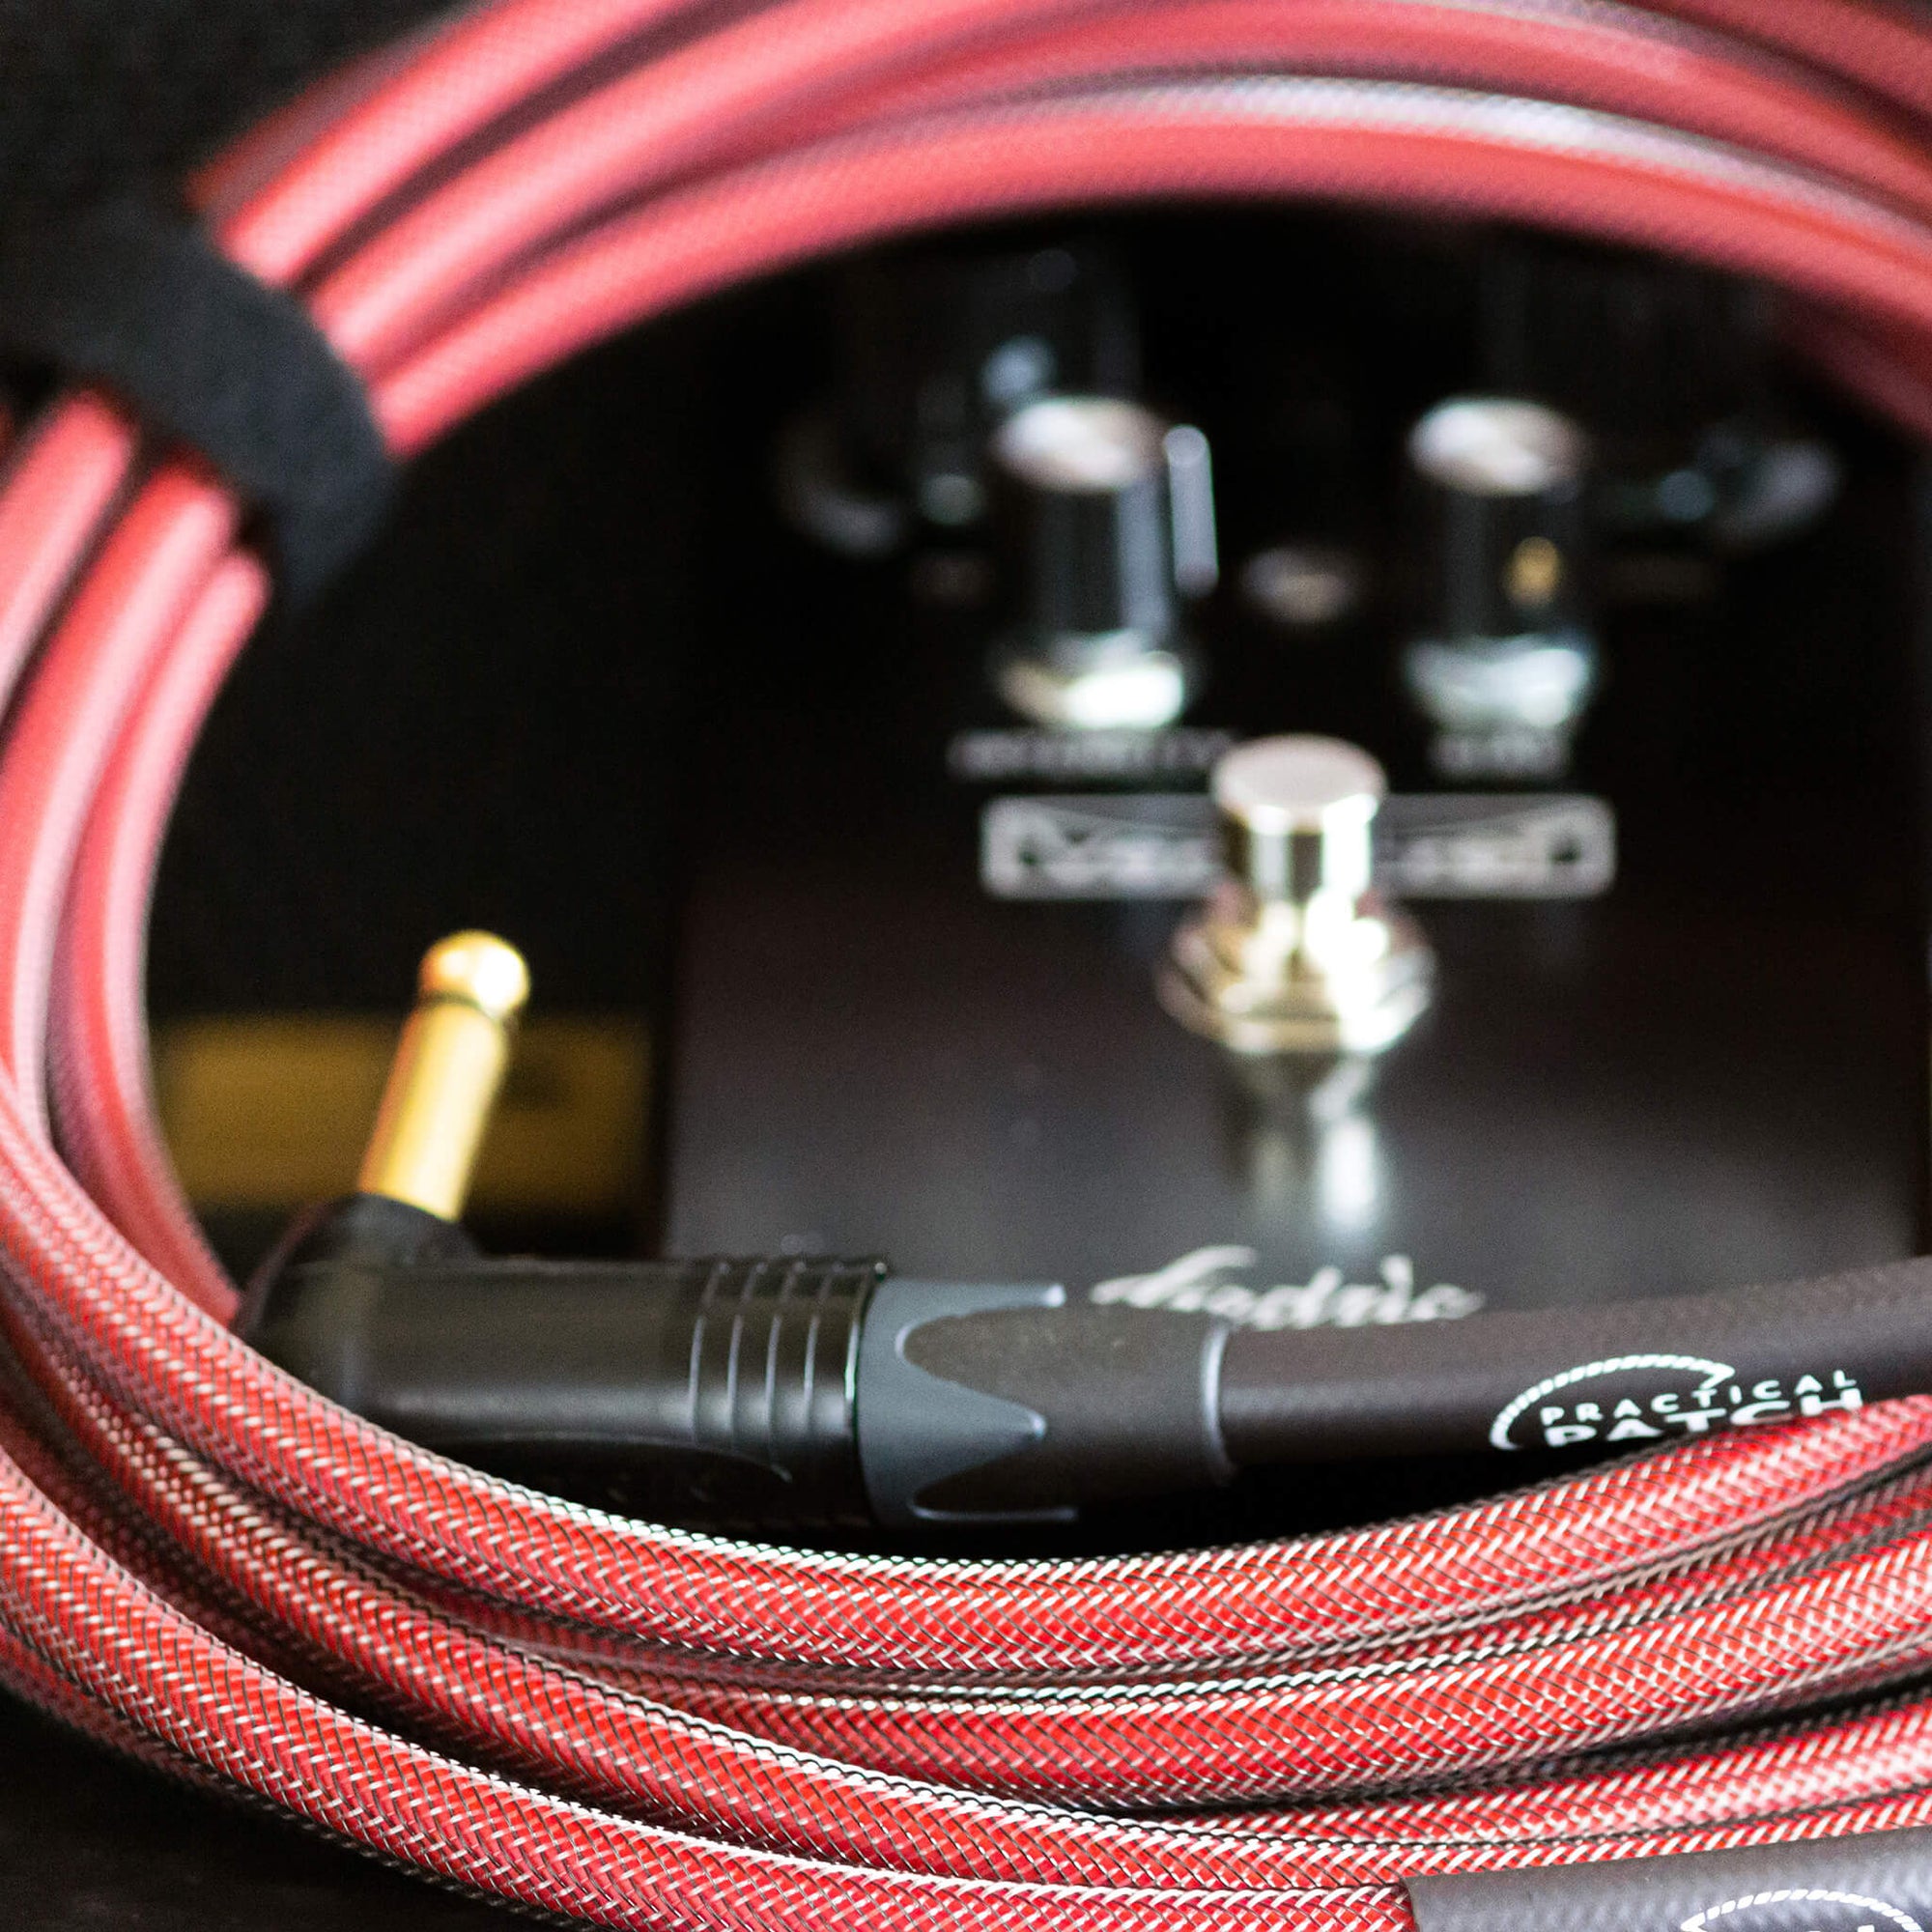 PRACTICAL PATCH Instrument Cable 15ft (4.5m) - Oxblood Red | Boost Guitar Pedals